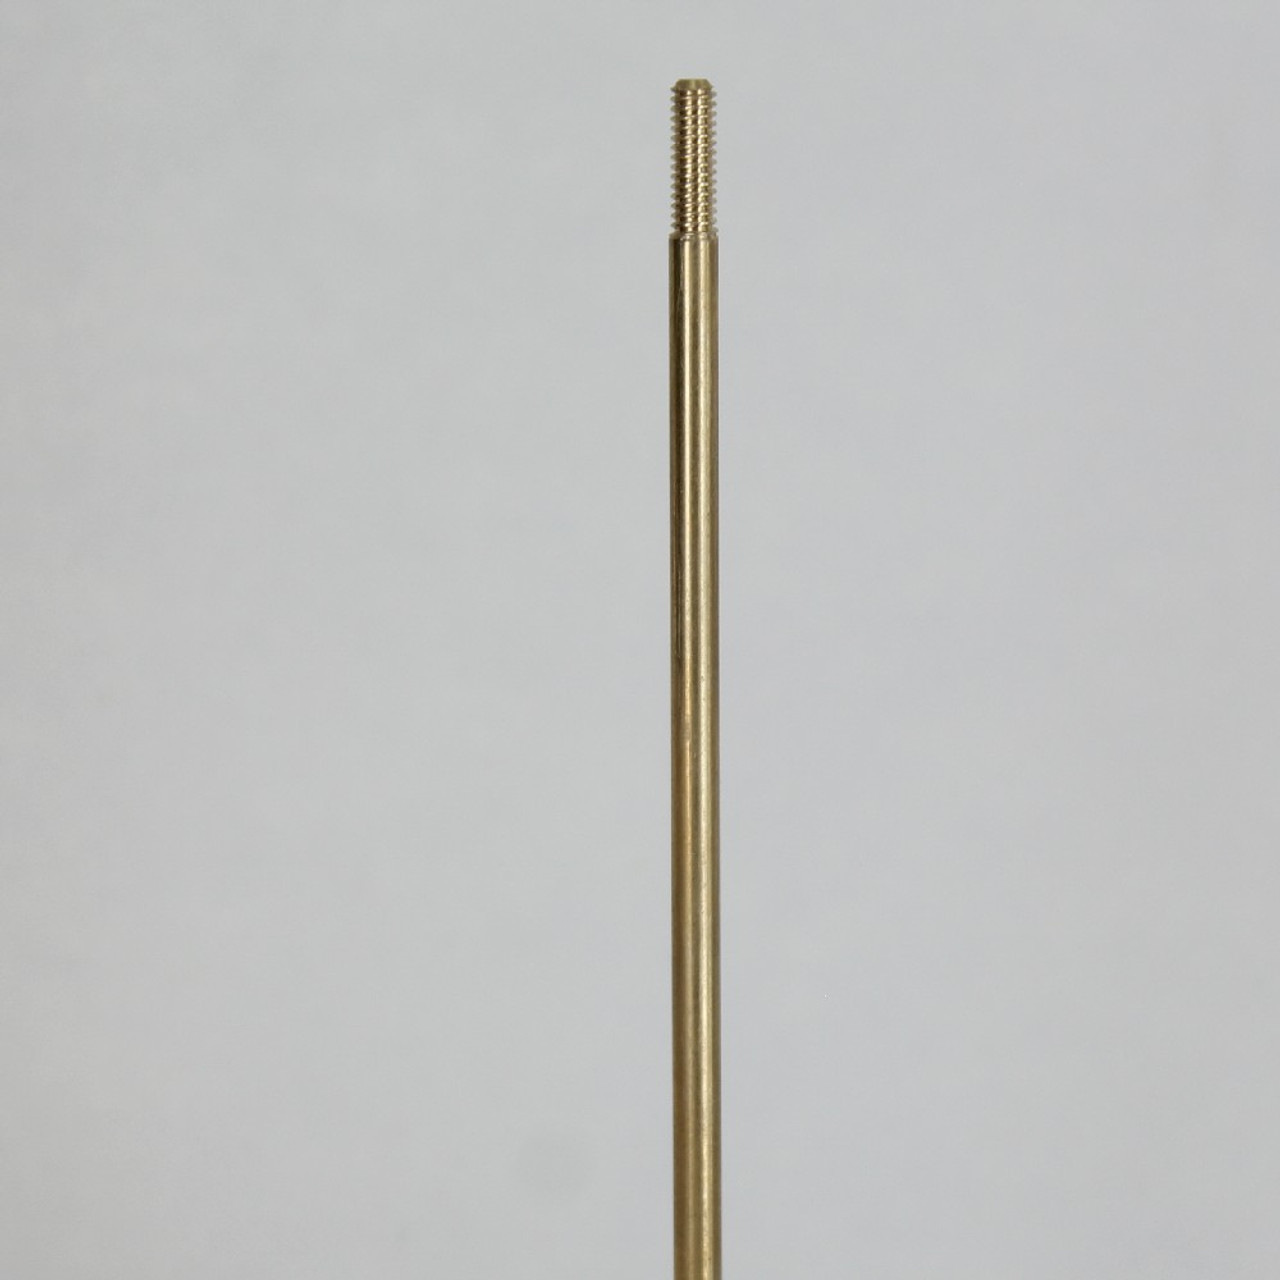 8 in. Long - 8/32 Threaded Brass Rod with 1/2in Long Thread on Both Ends.